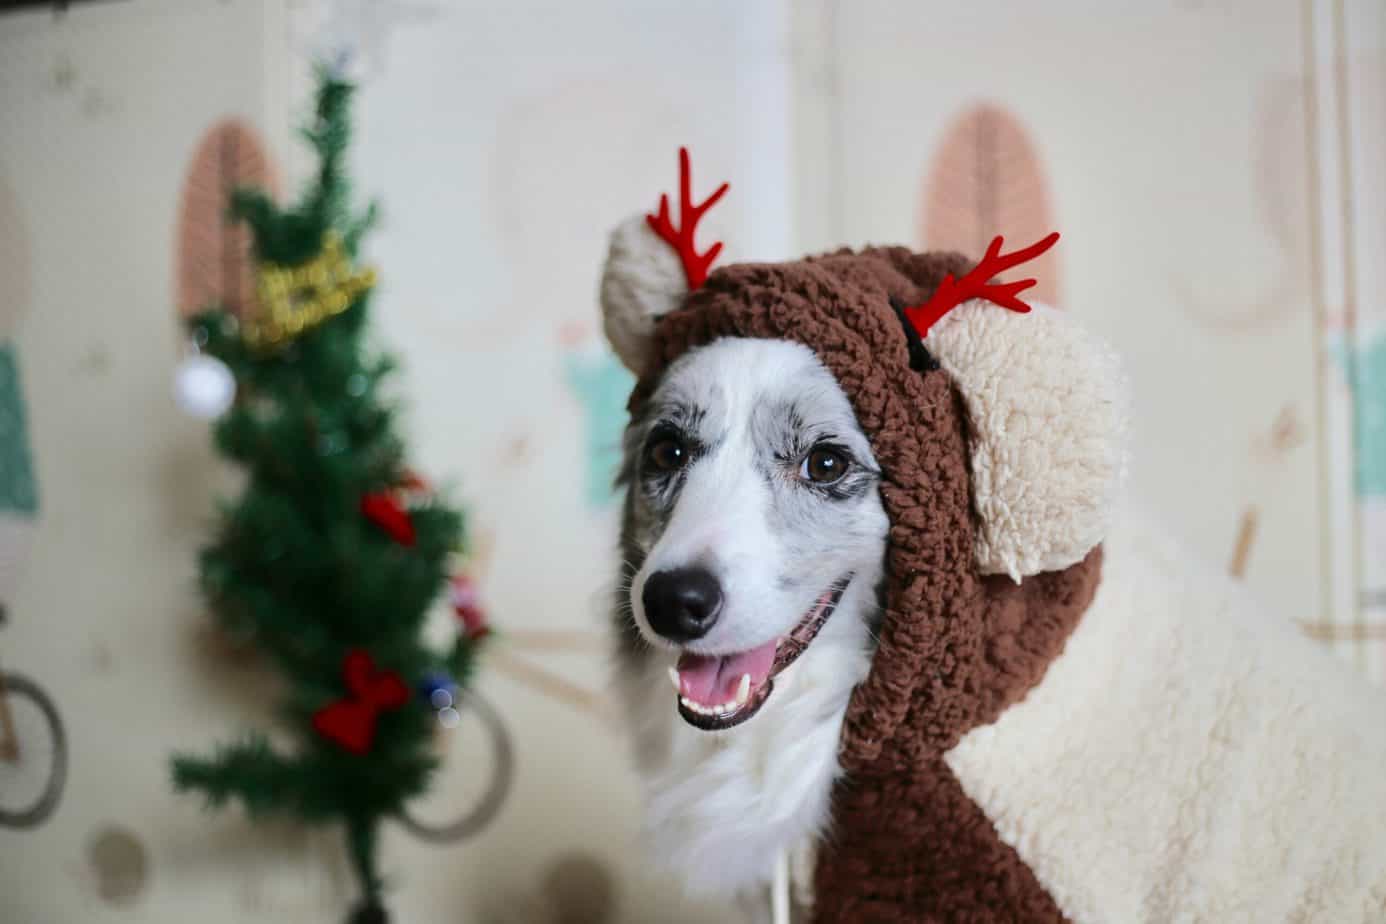 Best Christmas costumes for your dog